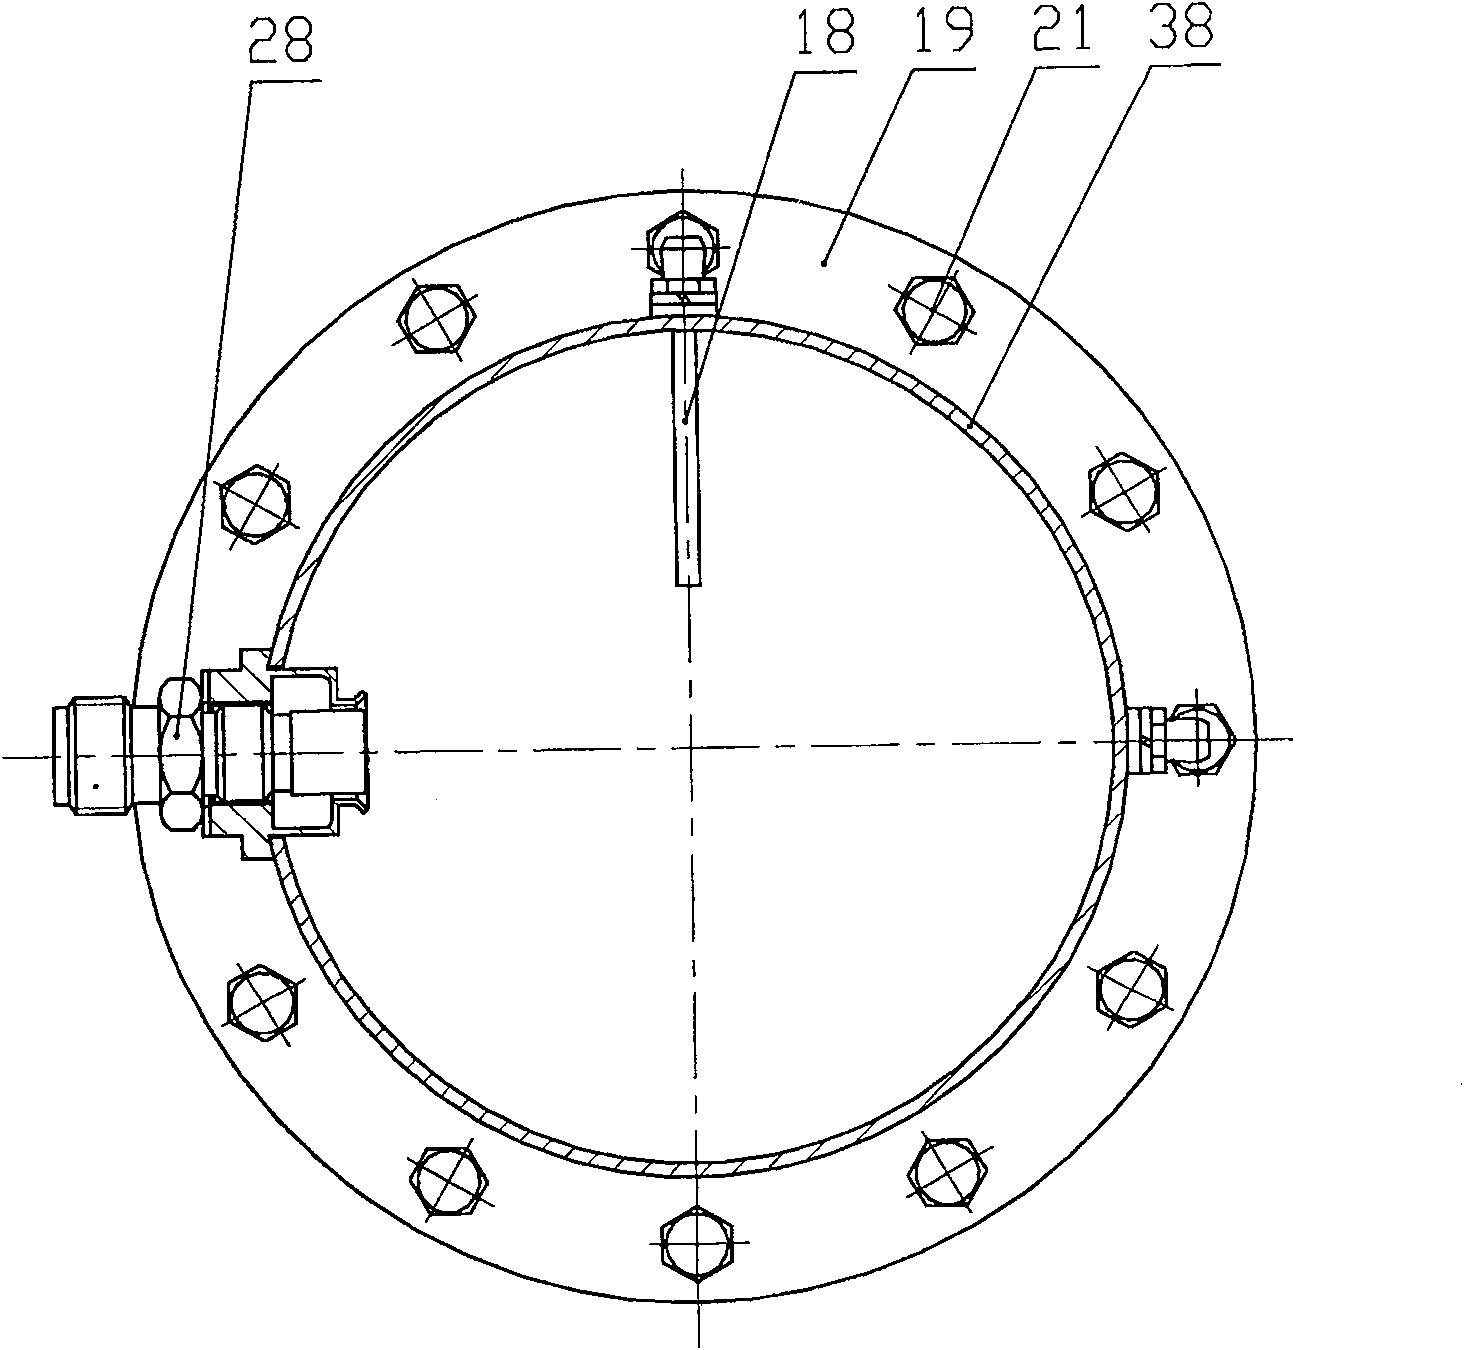 Active heat reclaiming method and device for diesel engine particulate drip catcher